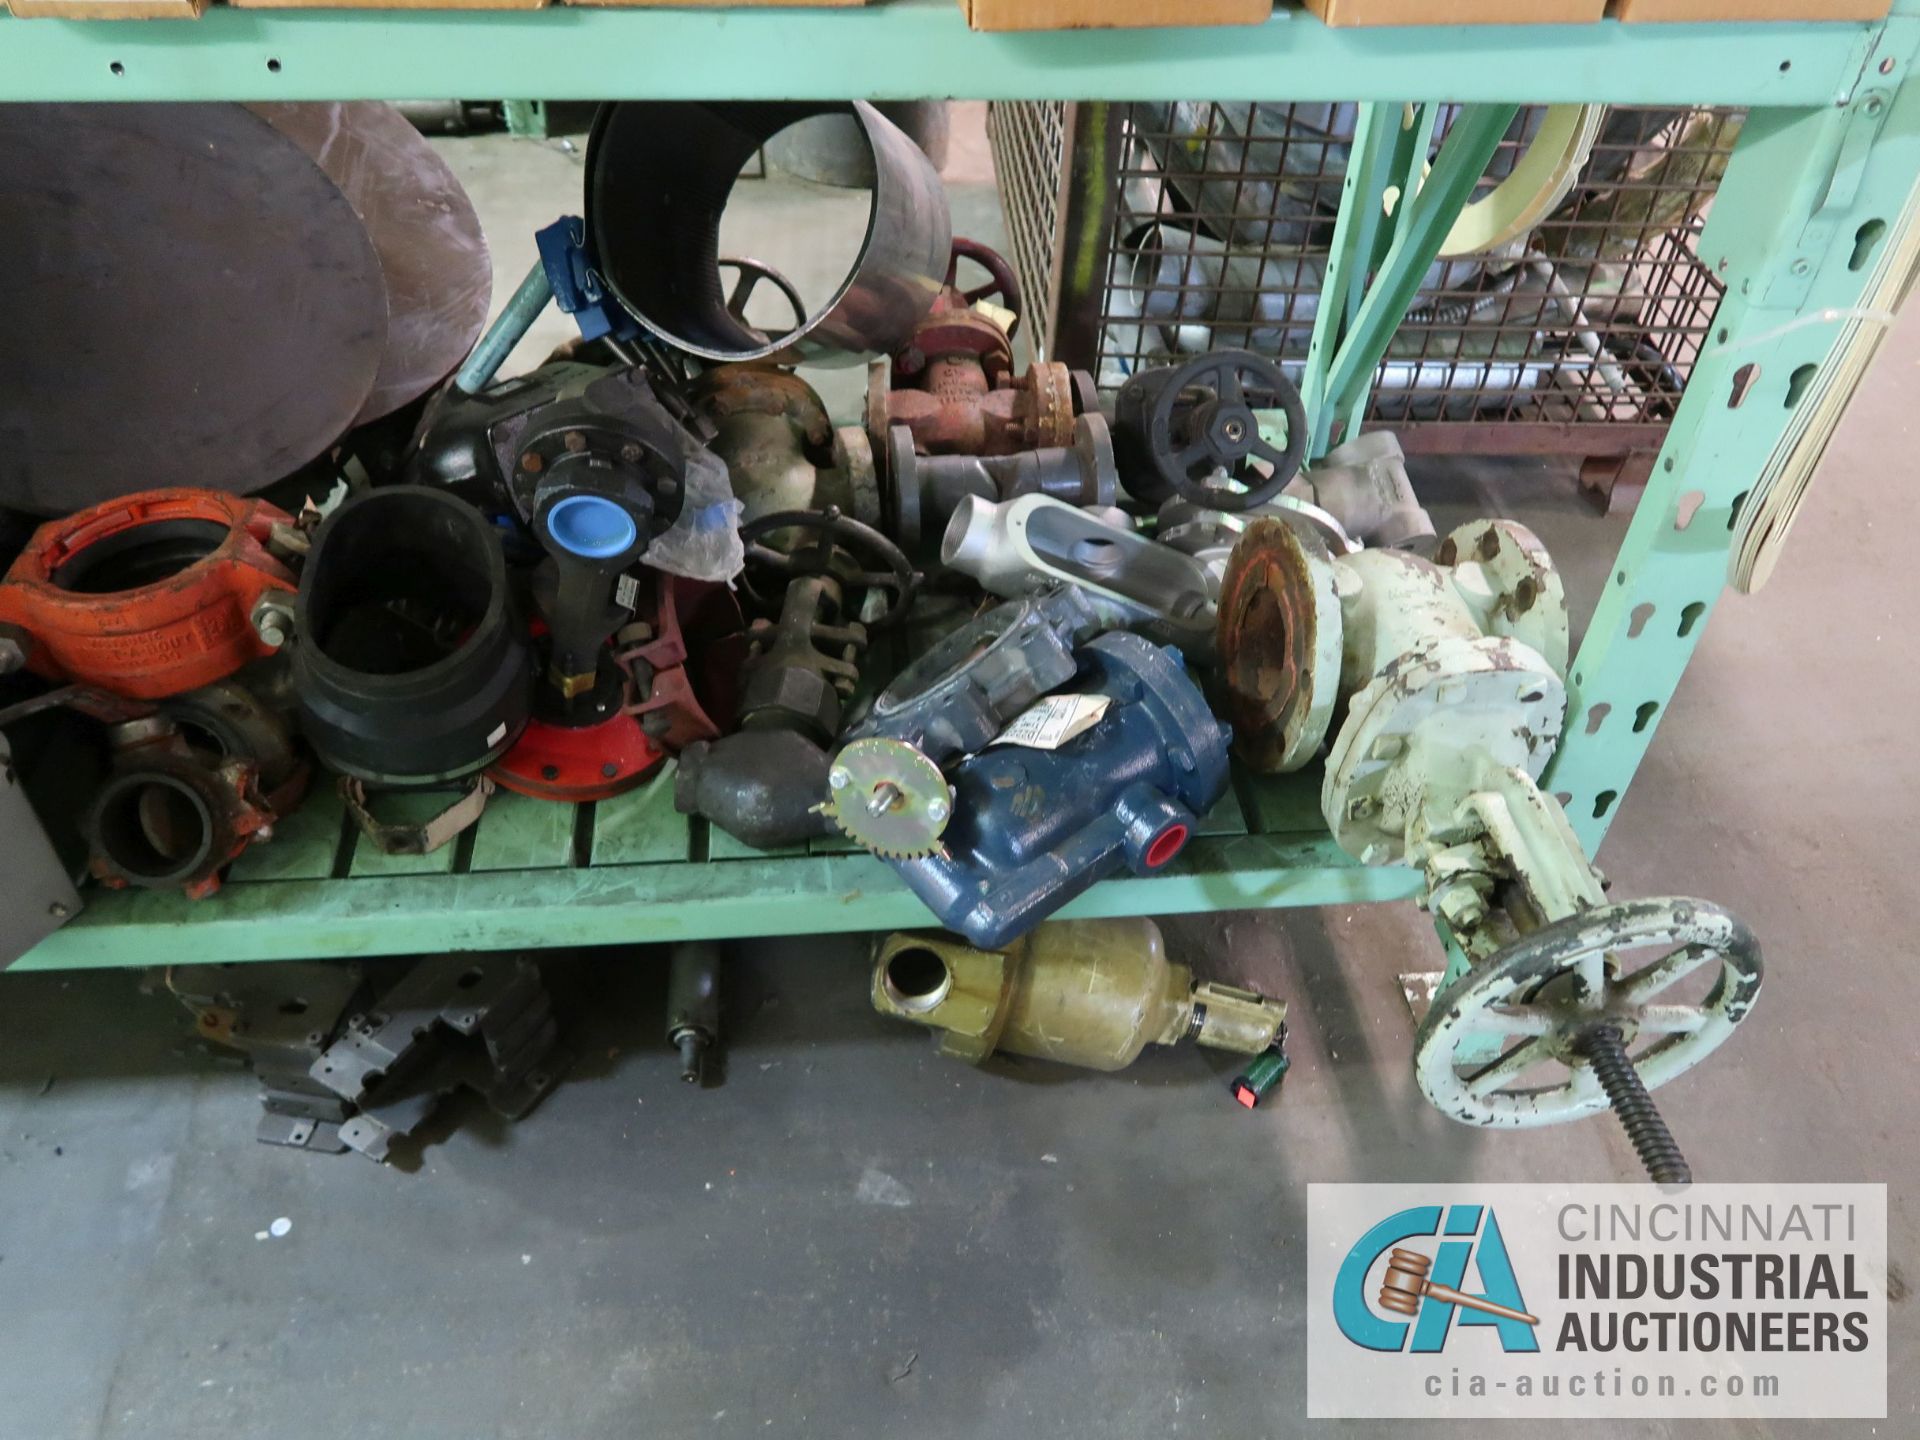 CONTENTS OF (6) RACKS INCLUDING MISCELLANEOUS VALVES, SEALS, FILTERS, PLUMBING PARTS, FIRE SPRINKLER - Image 3 of 26